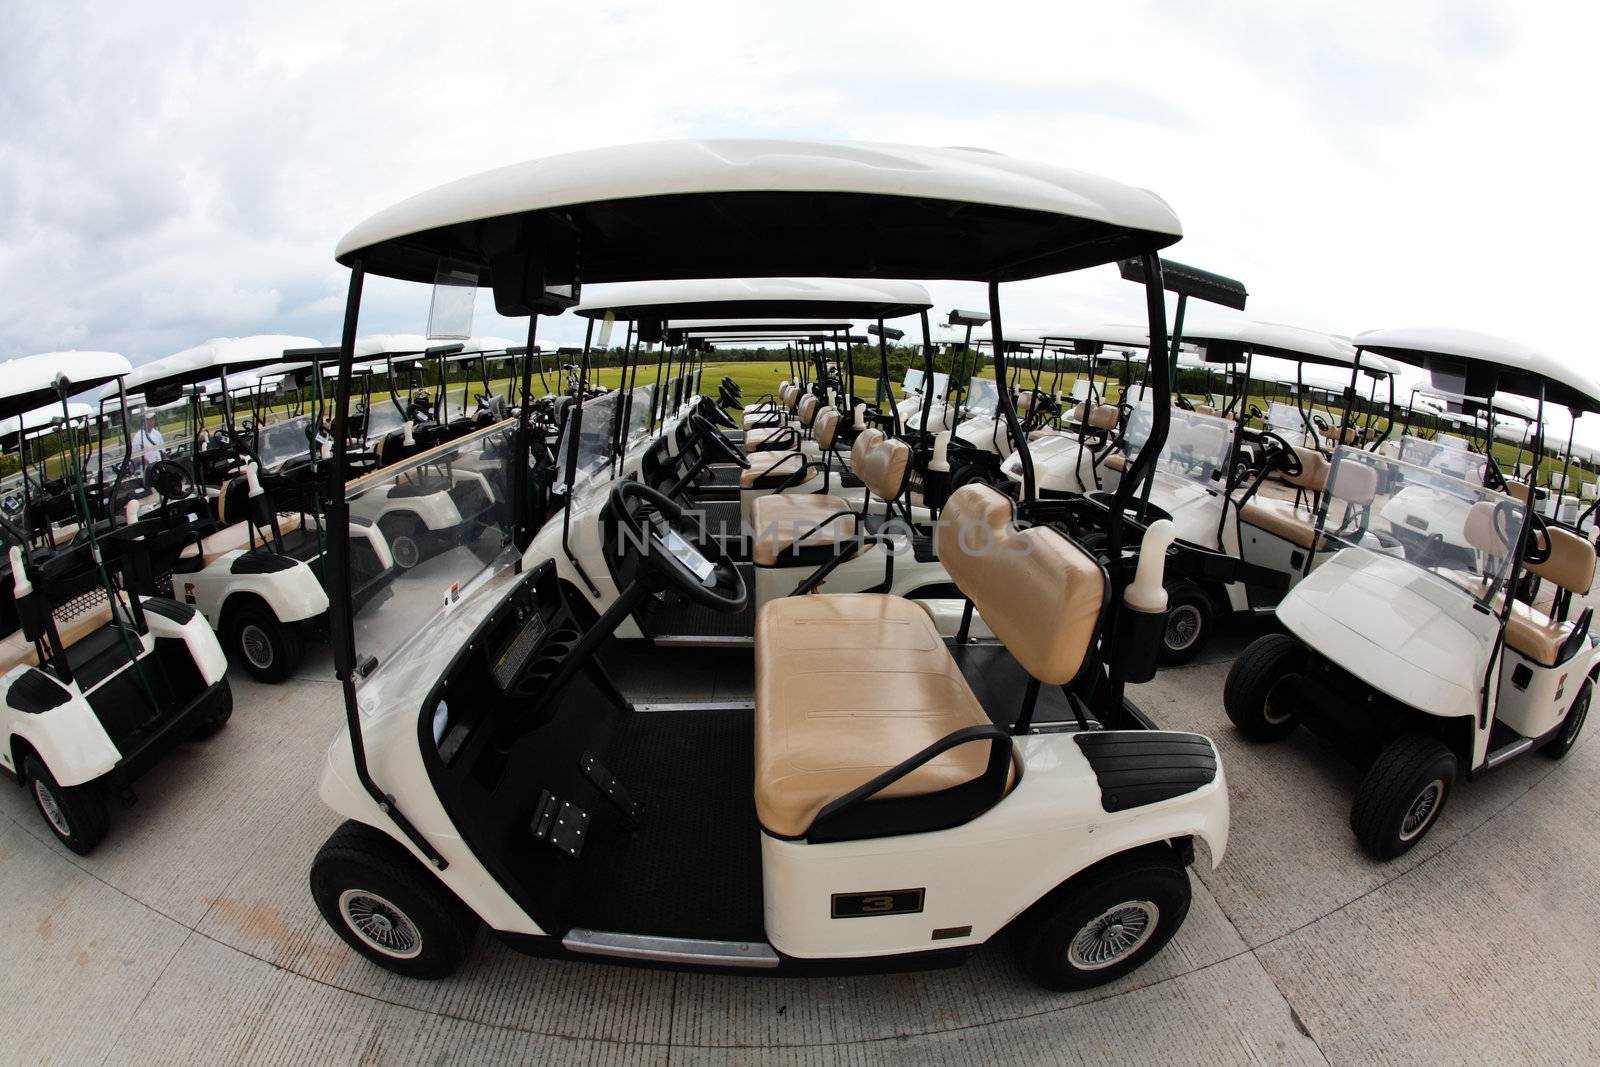 golf carts in a Cancun resort by gary718